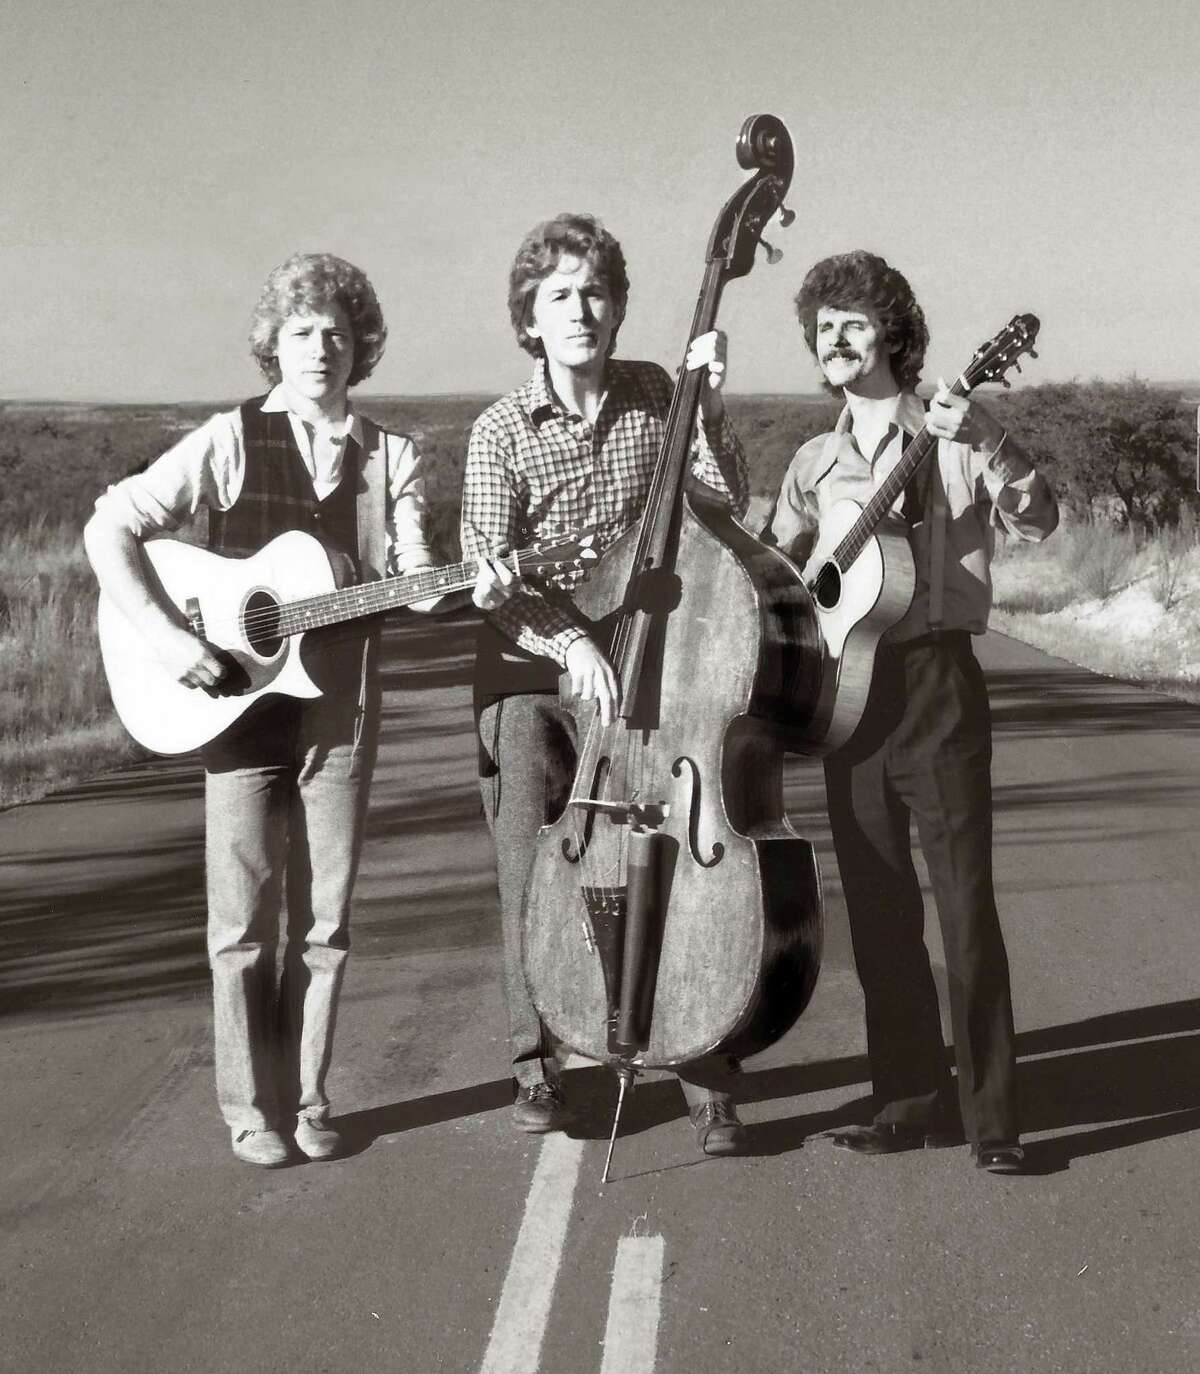 Texas-based Uncle Walt's Band was a trio featuring (from left) DesChamps Hood, David Ball and Walter Hyatt